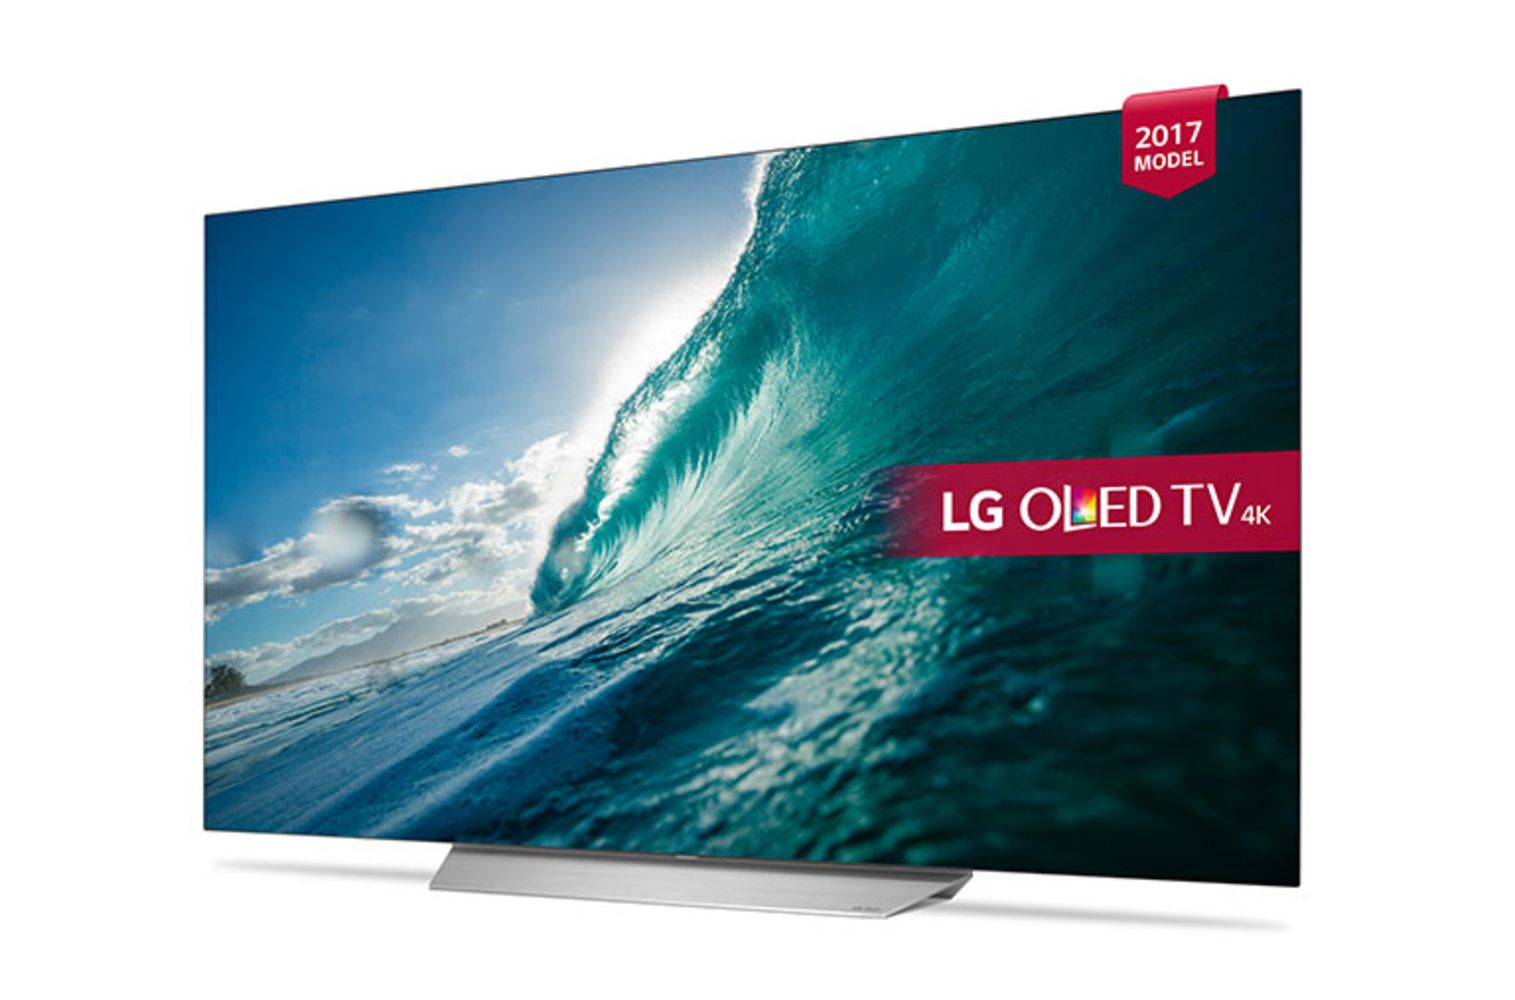 LG TV's & Monitors in a Range of Sizes, Audio, Smart Tech, Power Tools, Tool Kits & Cabinets, Gifts, Homewares  & More